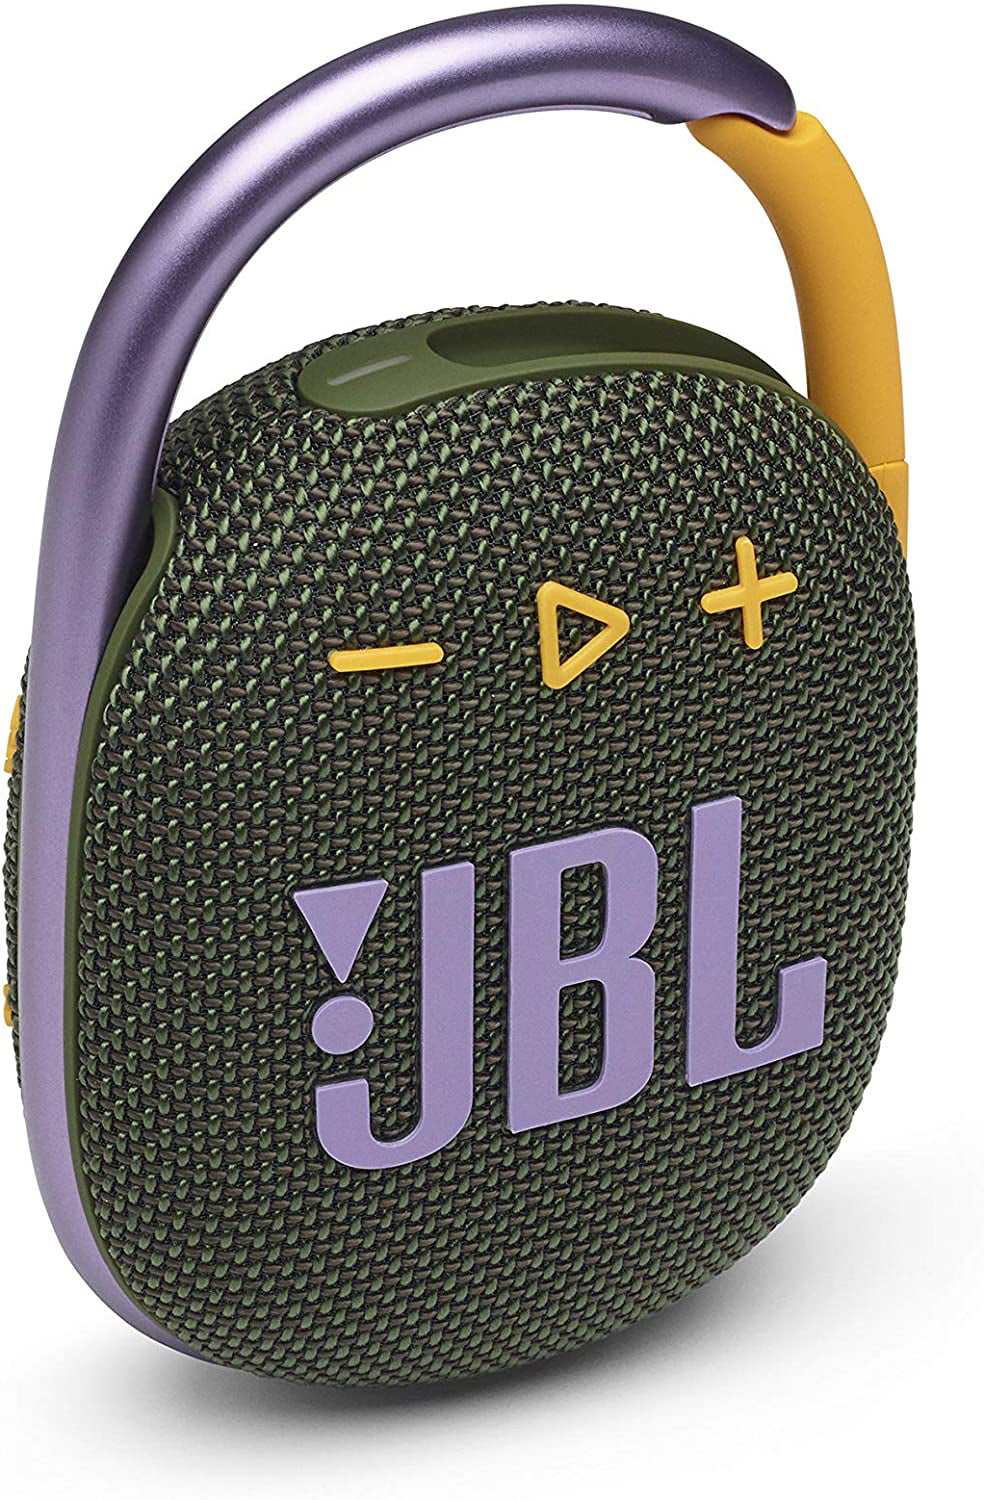 Green JBL Clip 4 Waterproof Portable Bluetooth Speaker with up to 10 Hours of Battery